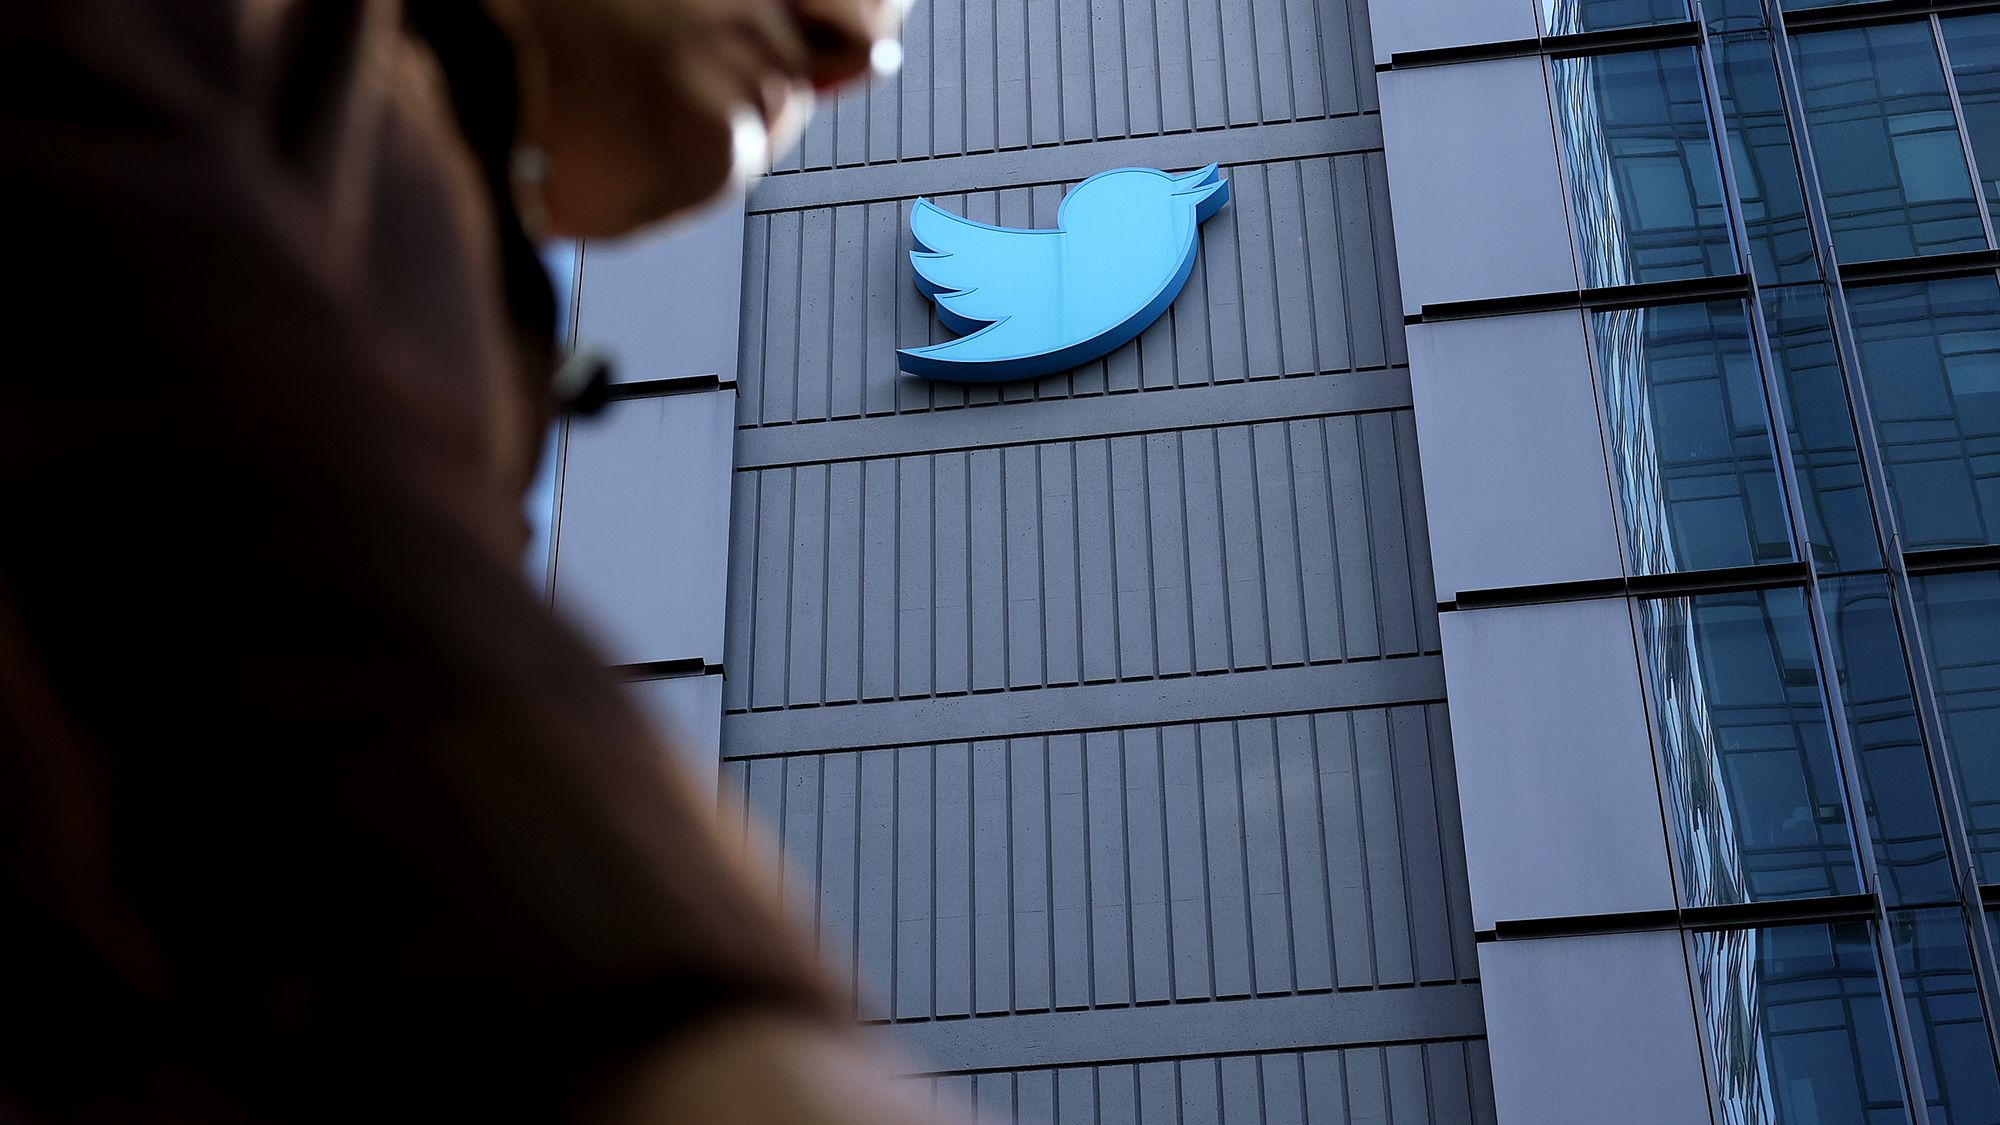 Twitter says portions of source code leaked online